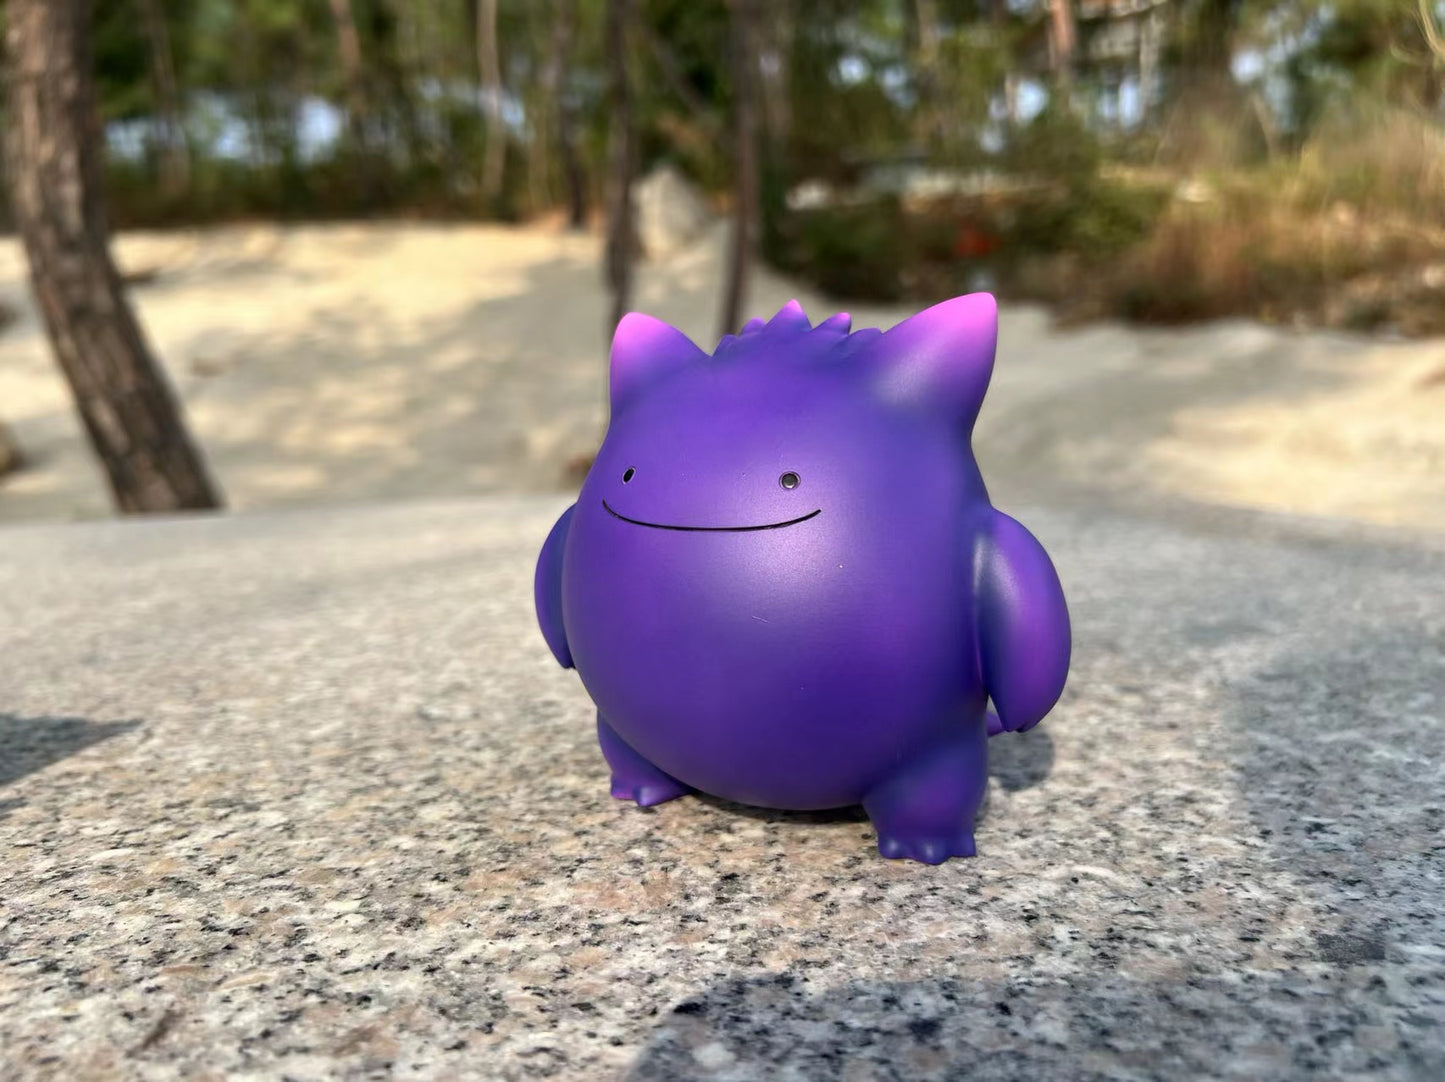 〖Make Up The Balance〗Pokémon Peripheral Products Ditto Gengar - YYDS Studio